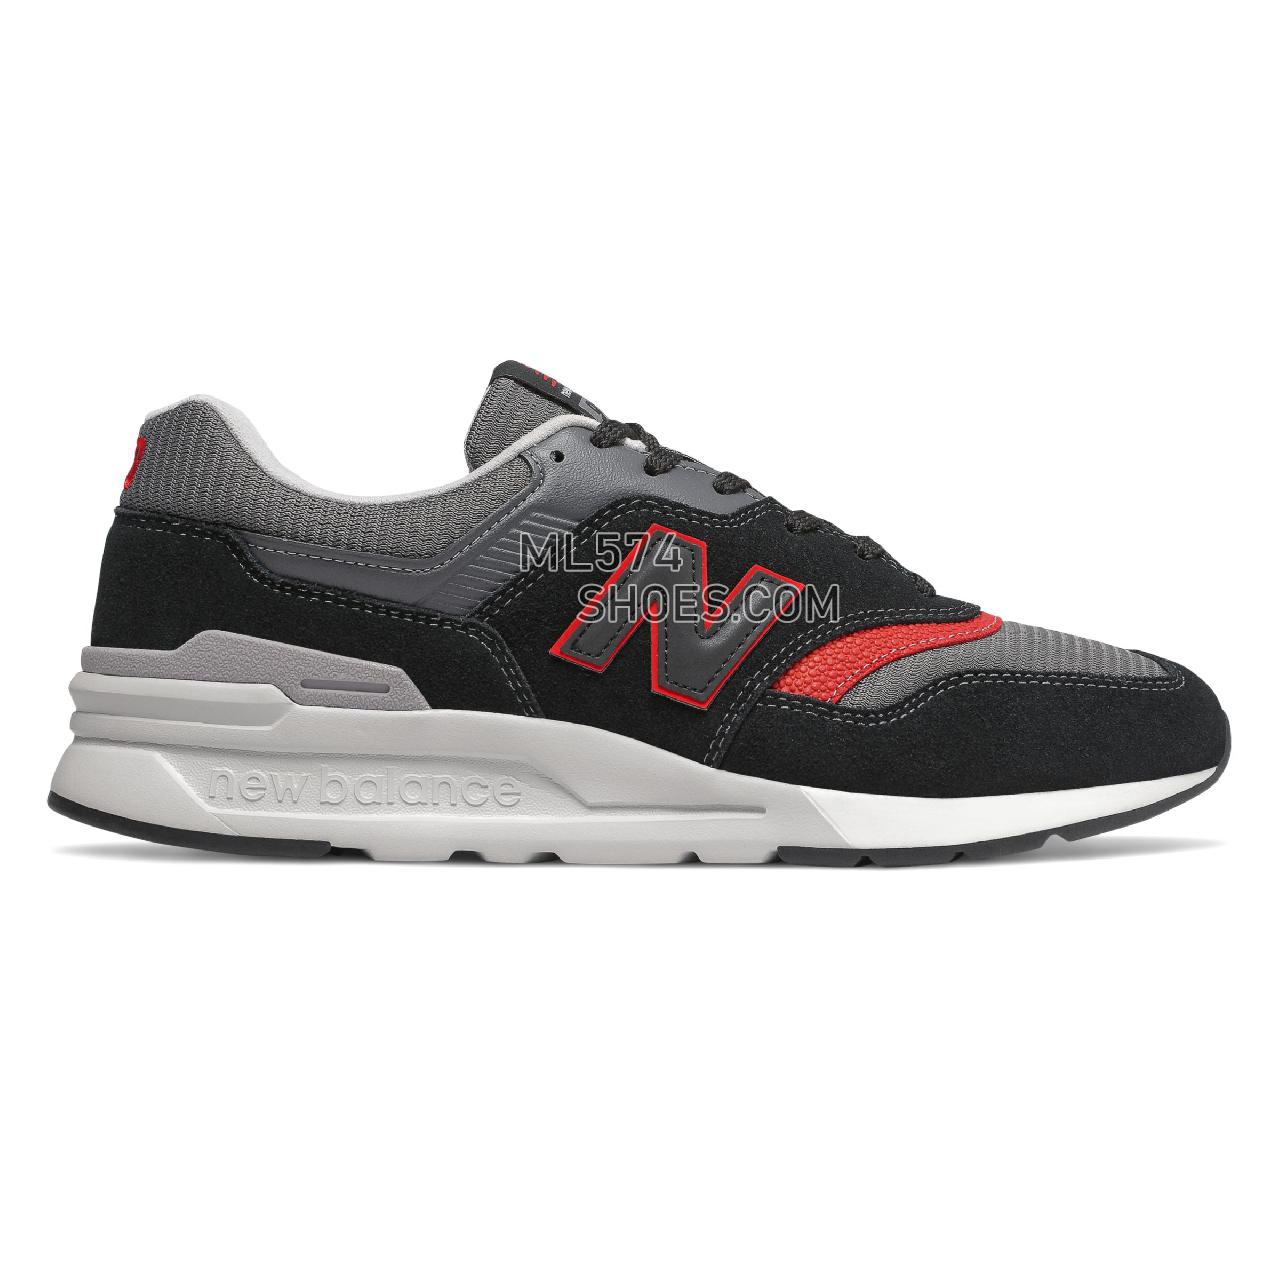 New Balance 997H - Men's 997H Classic CM997HV1-27438-M - Black with Grey and Red - CM997HXW